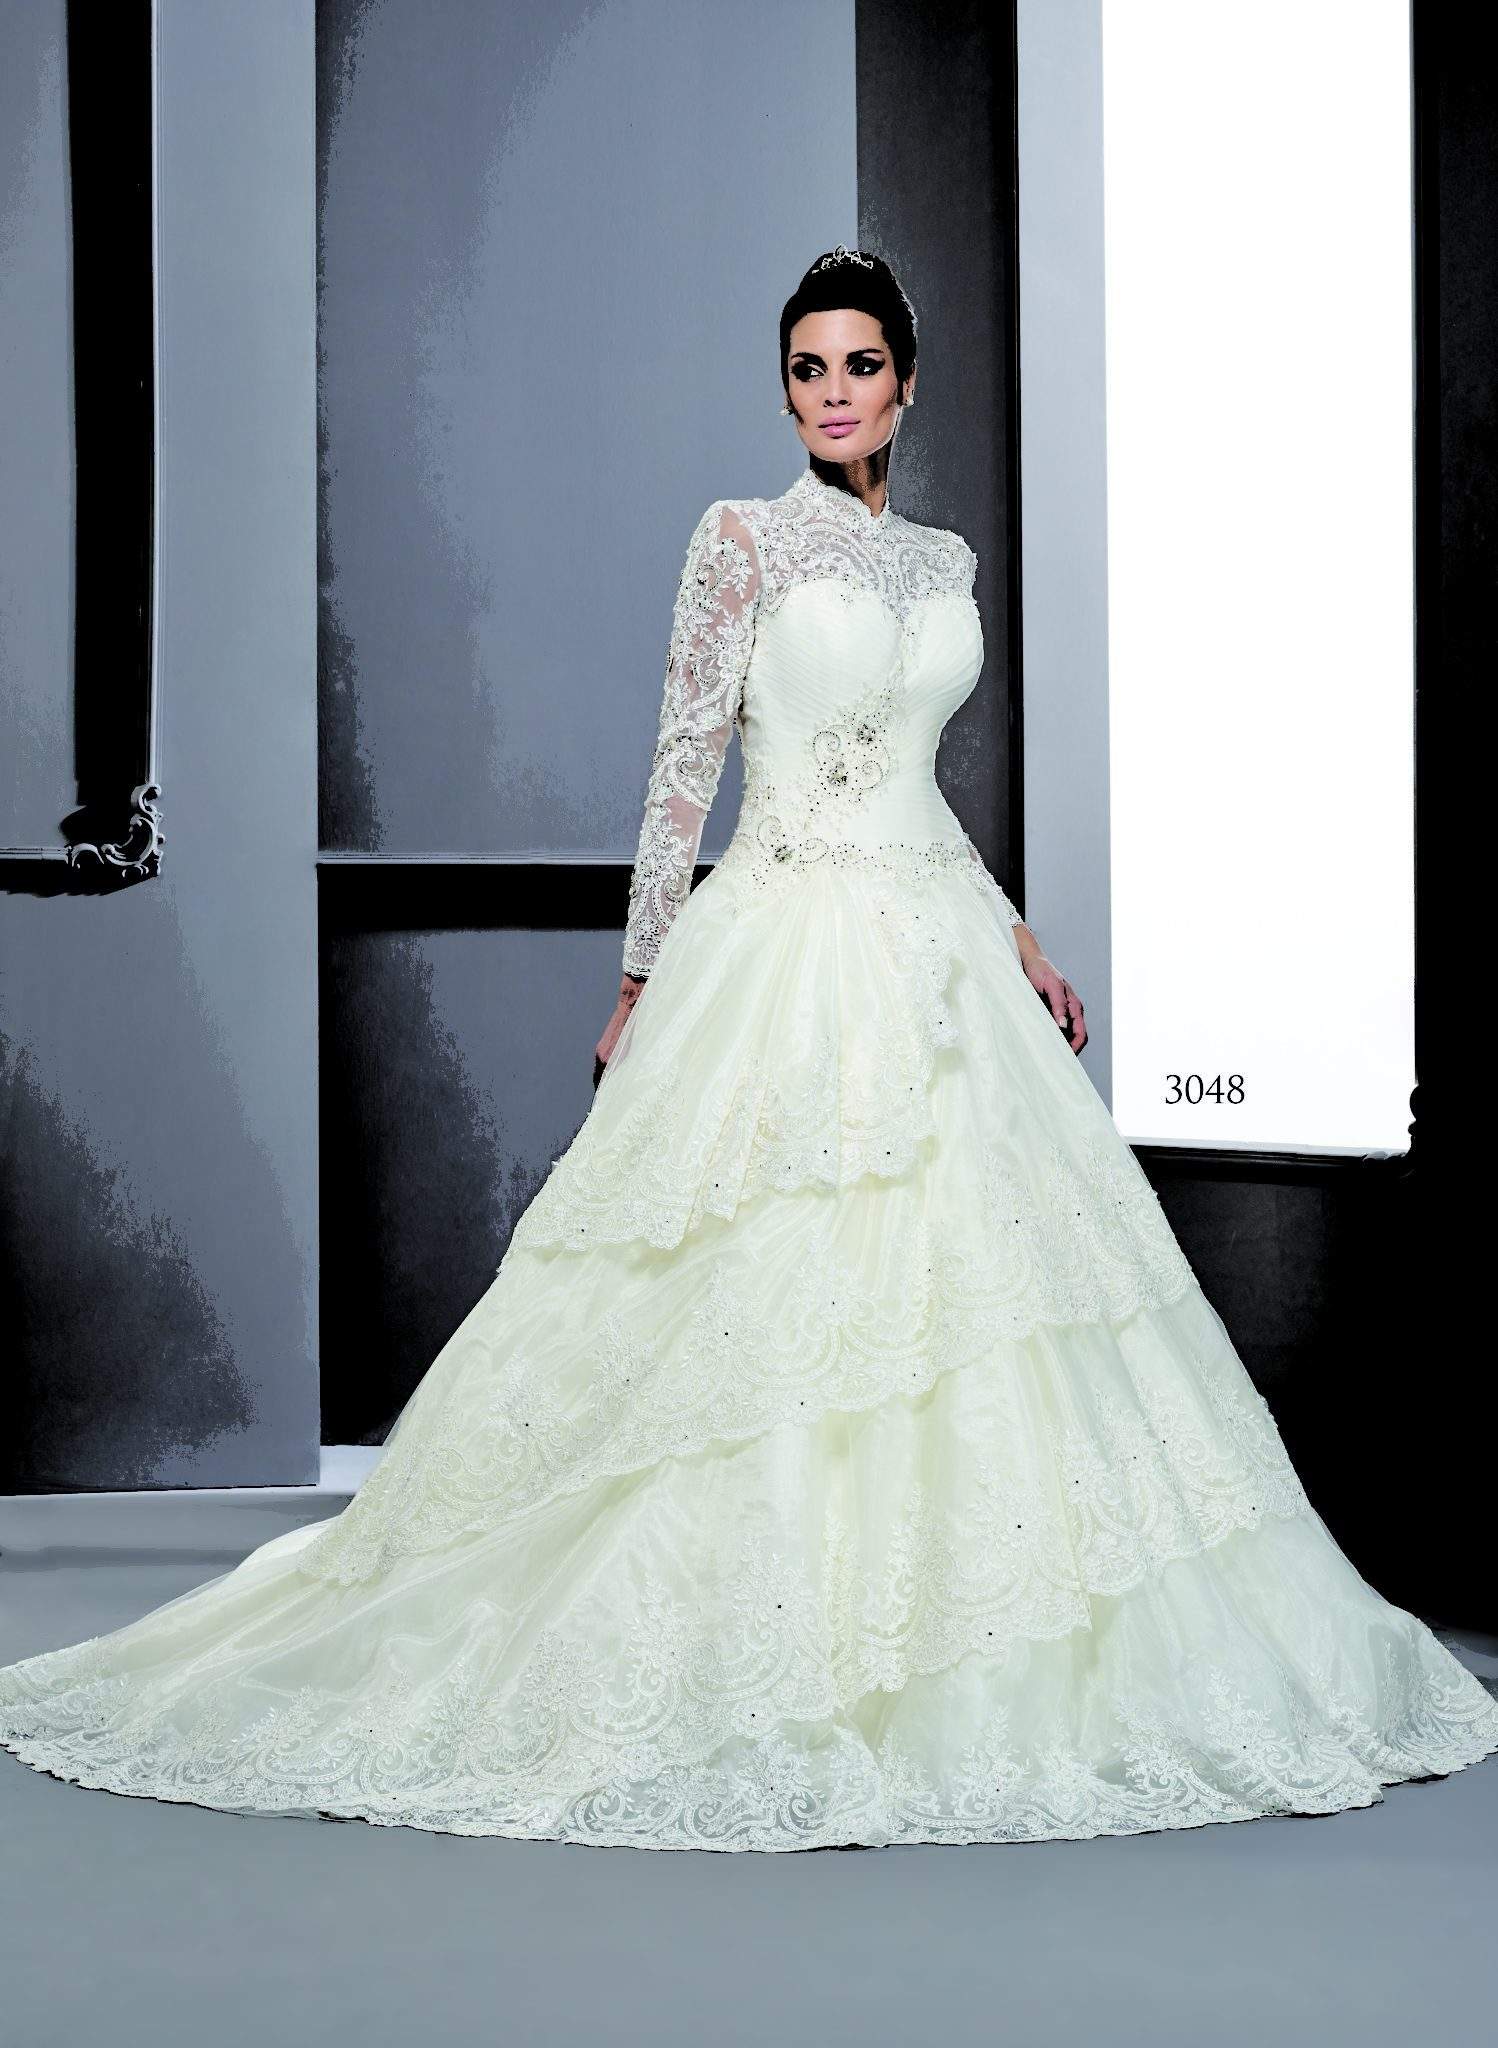 Wedding Dresses with Sleeves | Essense of Australia Bridal Gowns